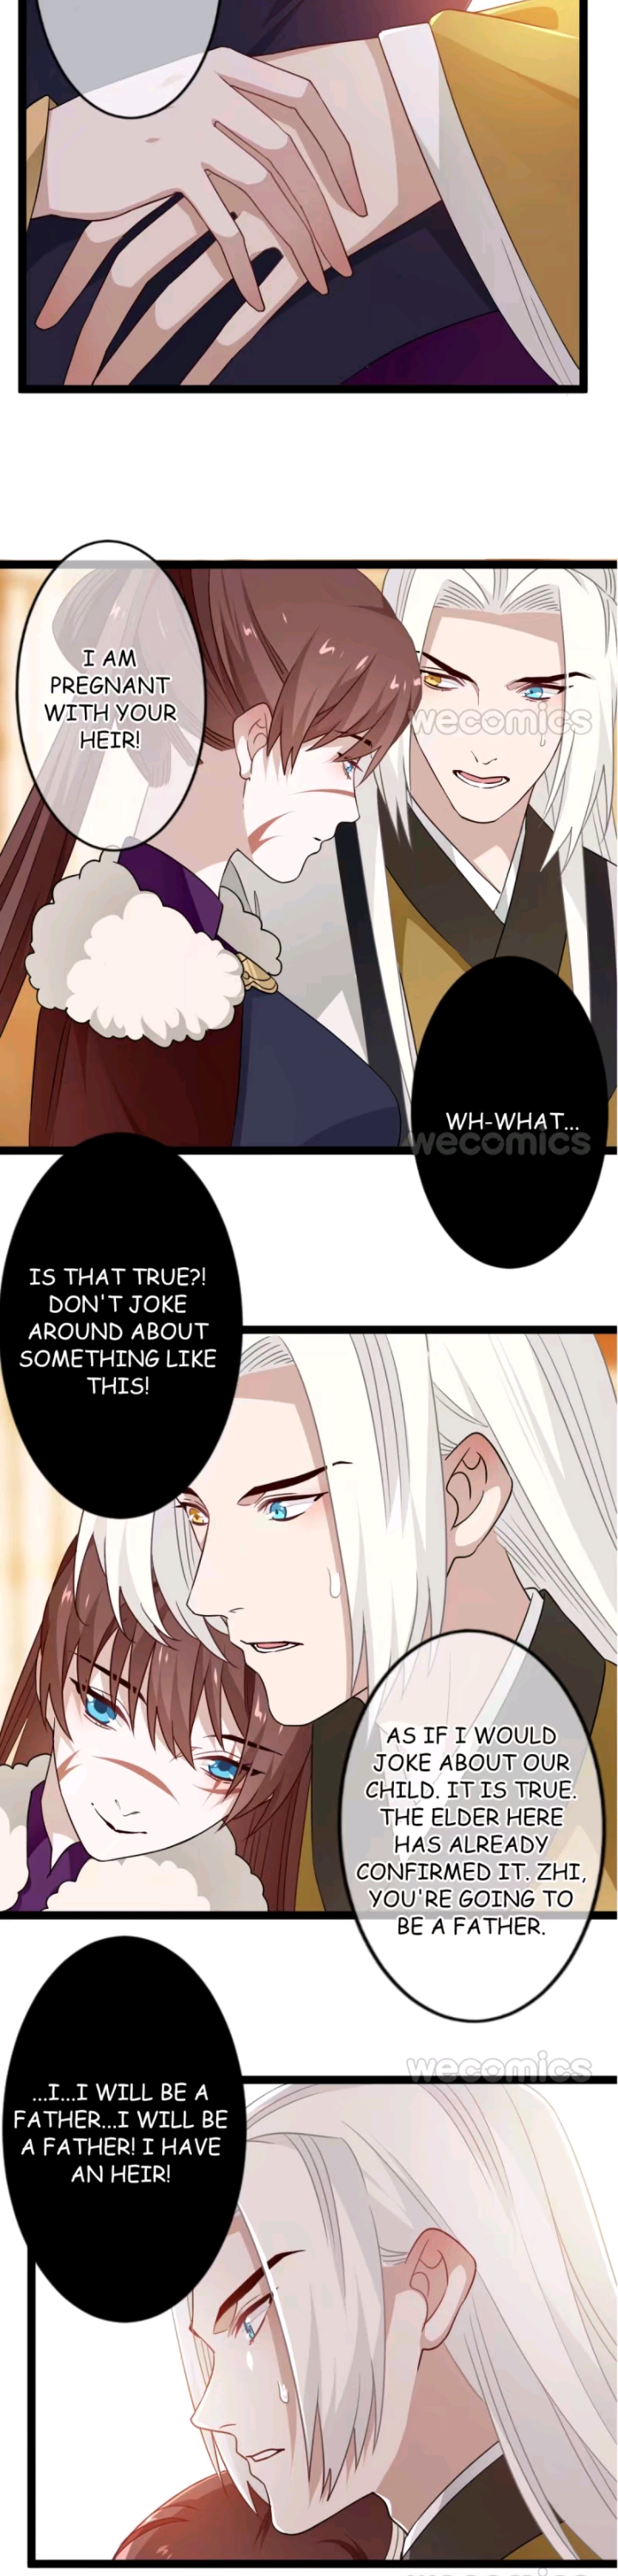 Curse of Loulan: The Tyrant Bestows Favor on Me Chapter 89 page 4